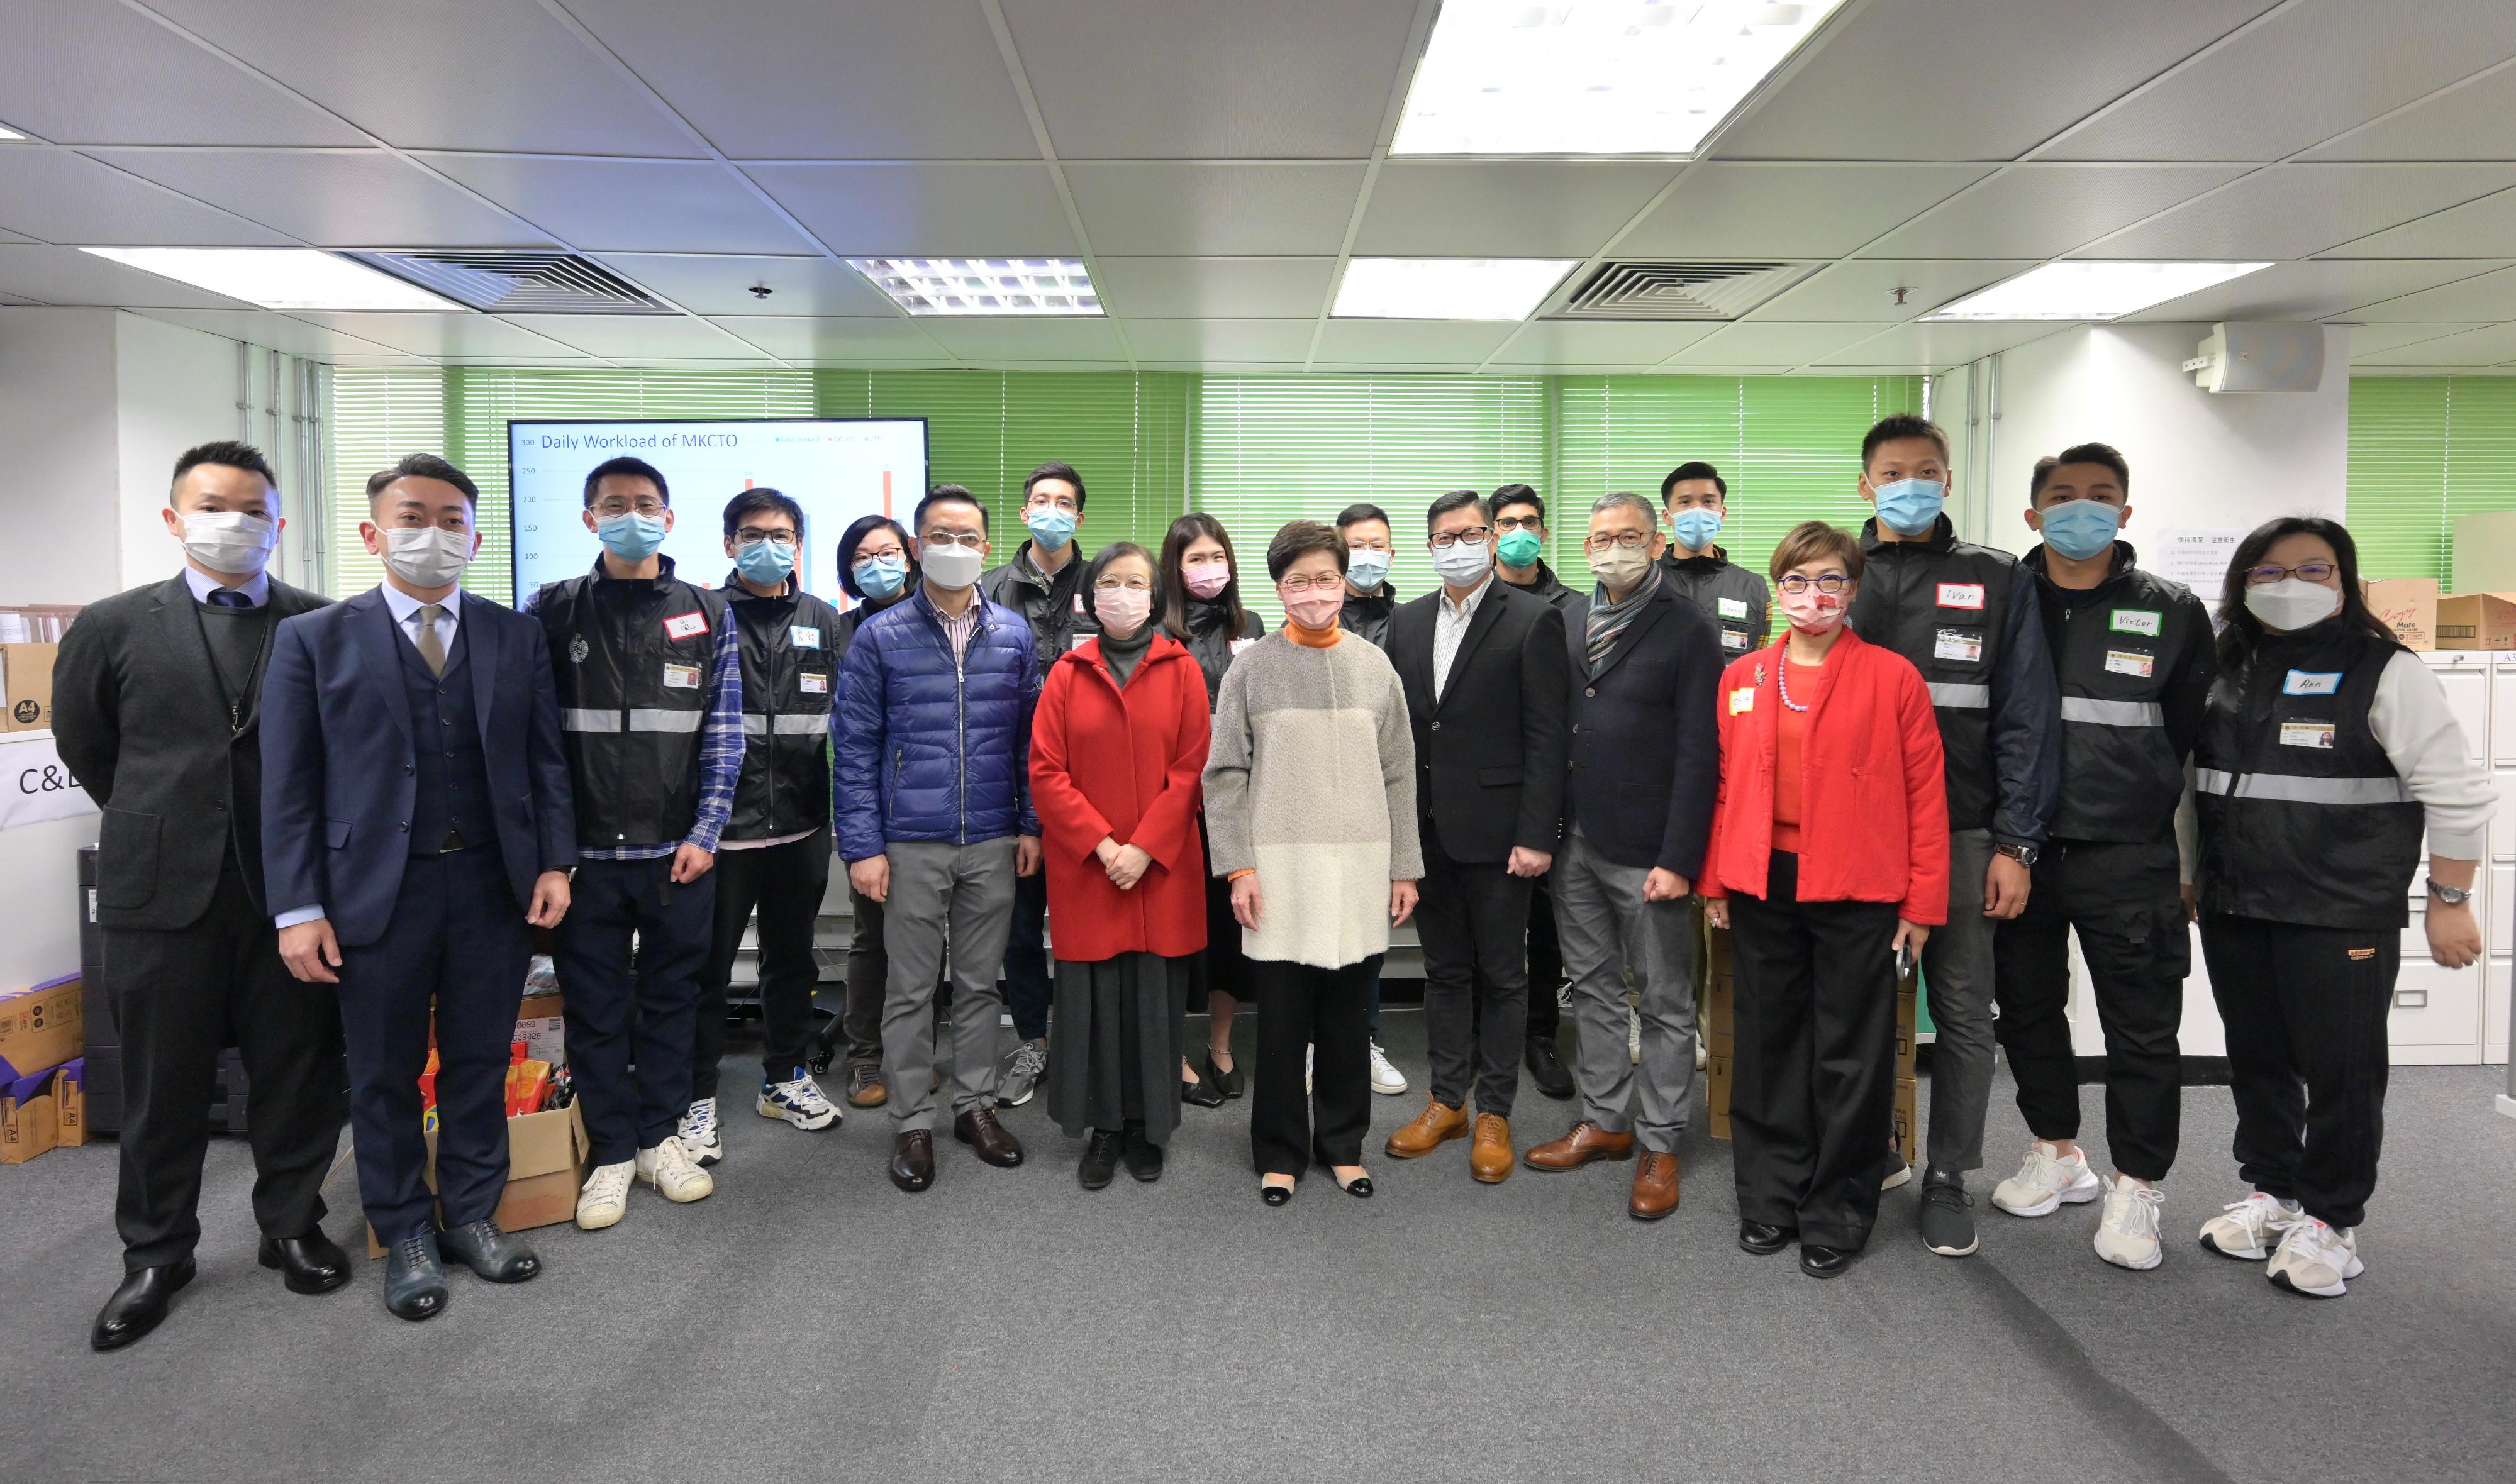 The Chief Executive, Mrs Carrie Lam, visited the Contact Tracing Offices in Kai Tak and Mong Kok today (February 1). Photo shows (front row, from left) the Director of Health, Dr Ronald Lam; the Secretary for Food and Health, Professor Sophia Chan; Mrs Lam; the Secretary for Security, Mr Tang Ping-keung; the Commissioner of Correctional Services, Mr Woo Ying-ming; and officers of the Correctional Services Department at the Contact Tracing Office in Mong Kok.